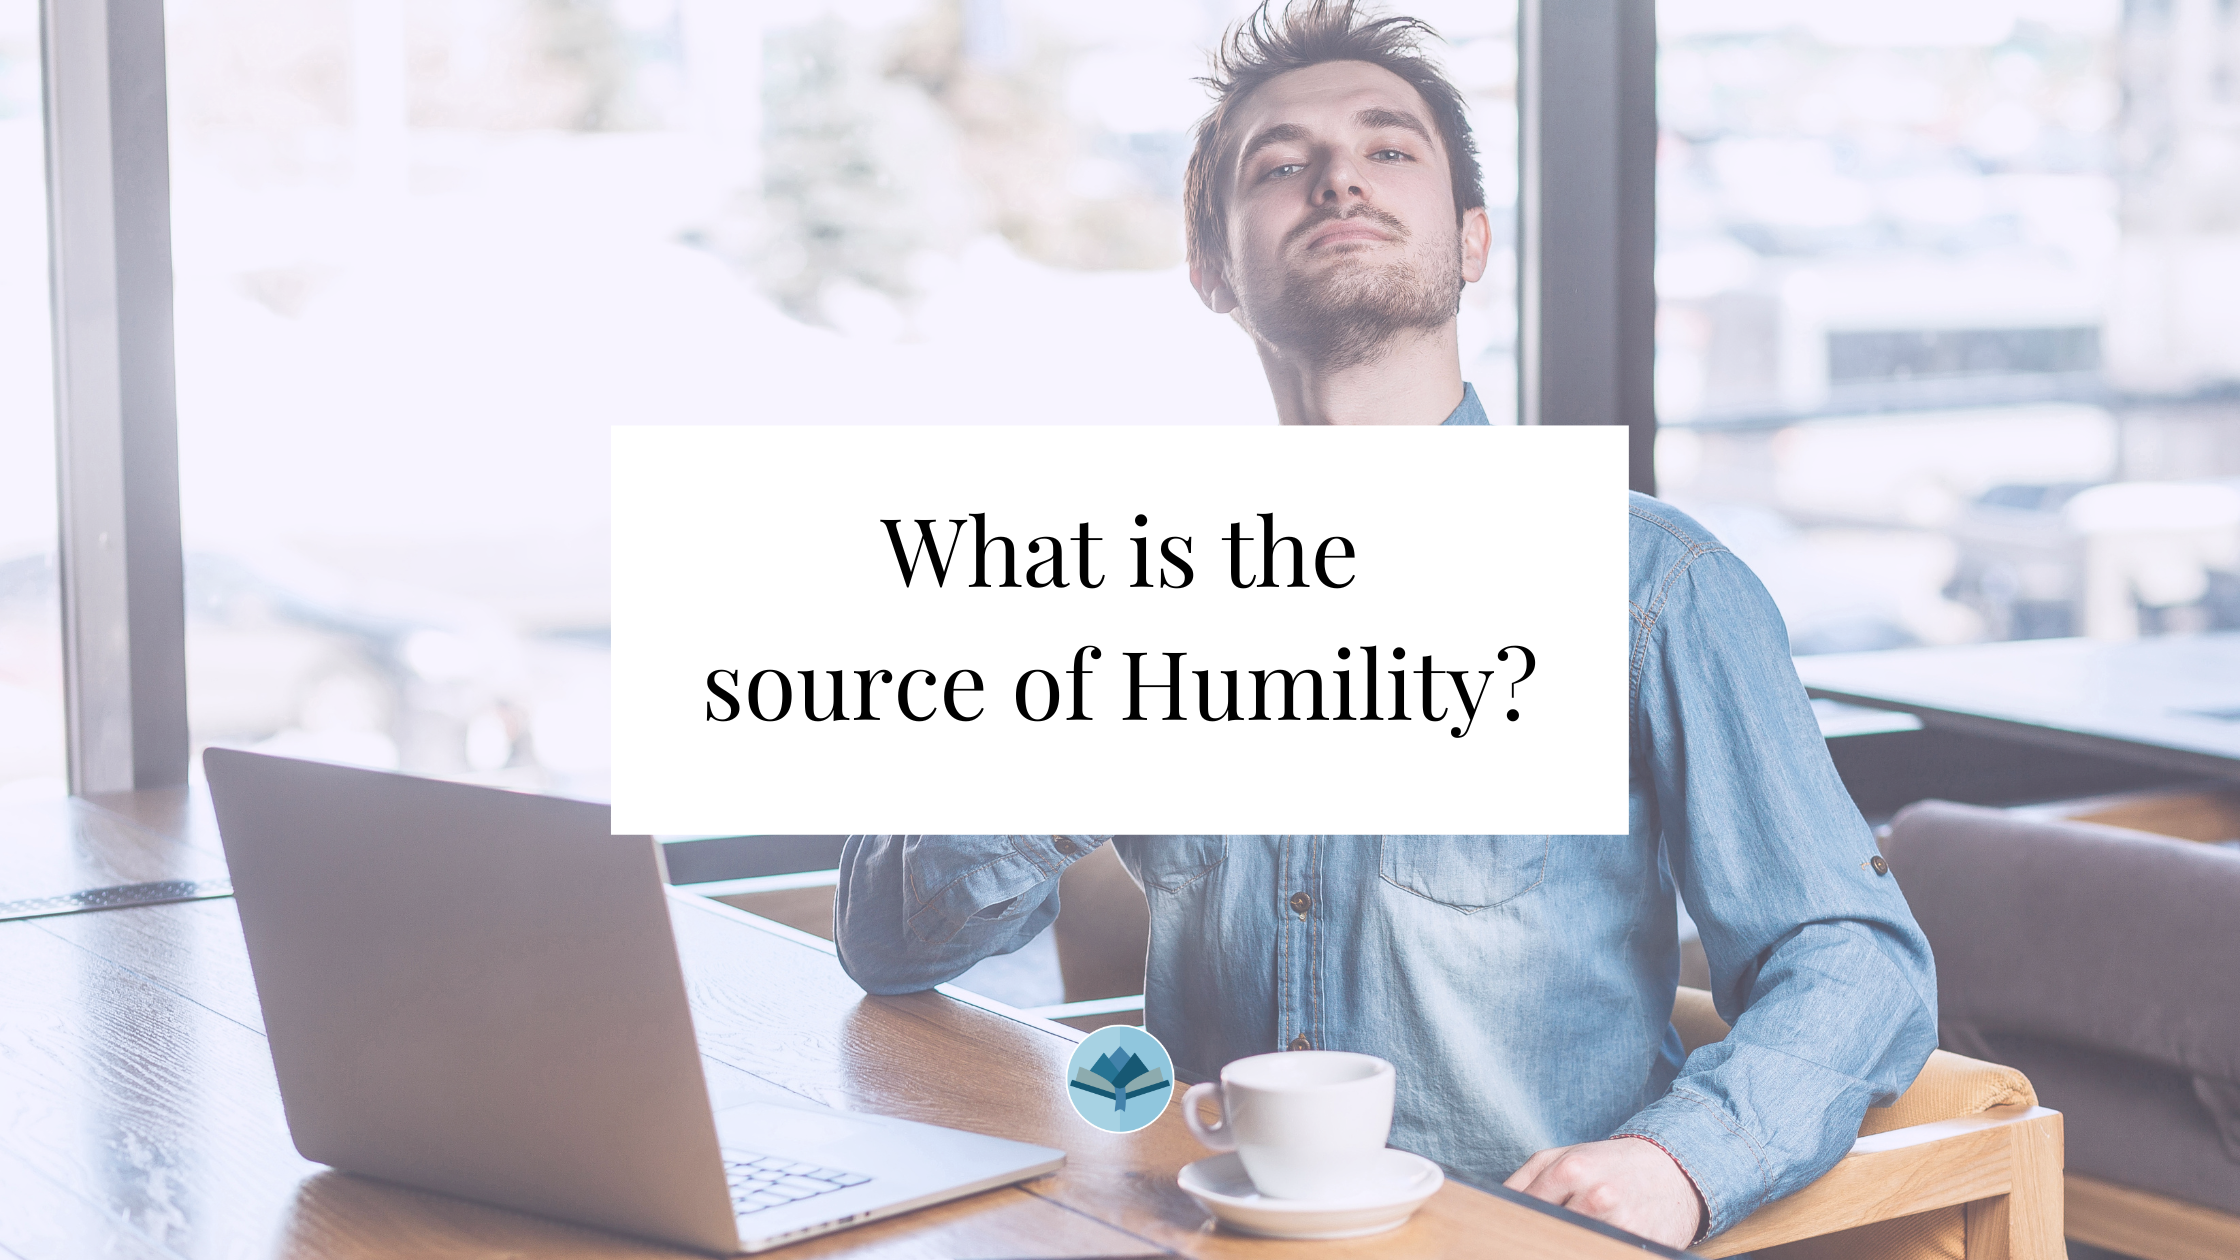 What is the source of humility